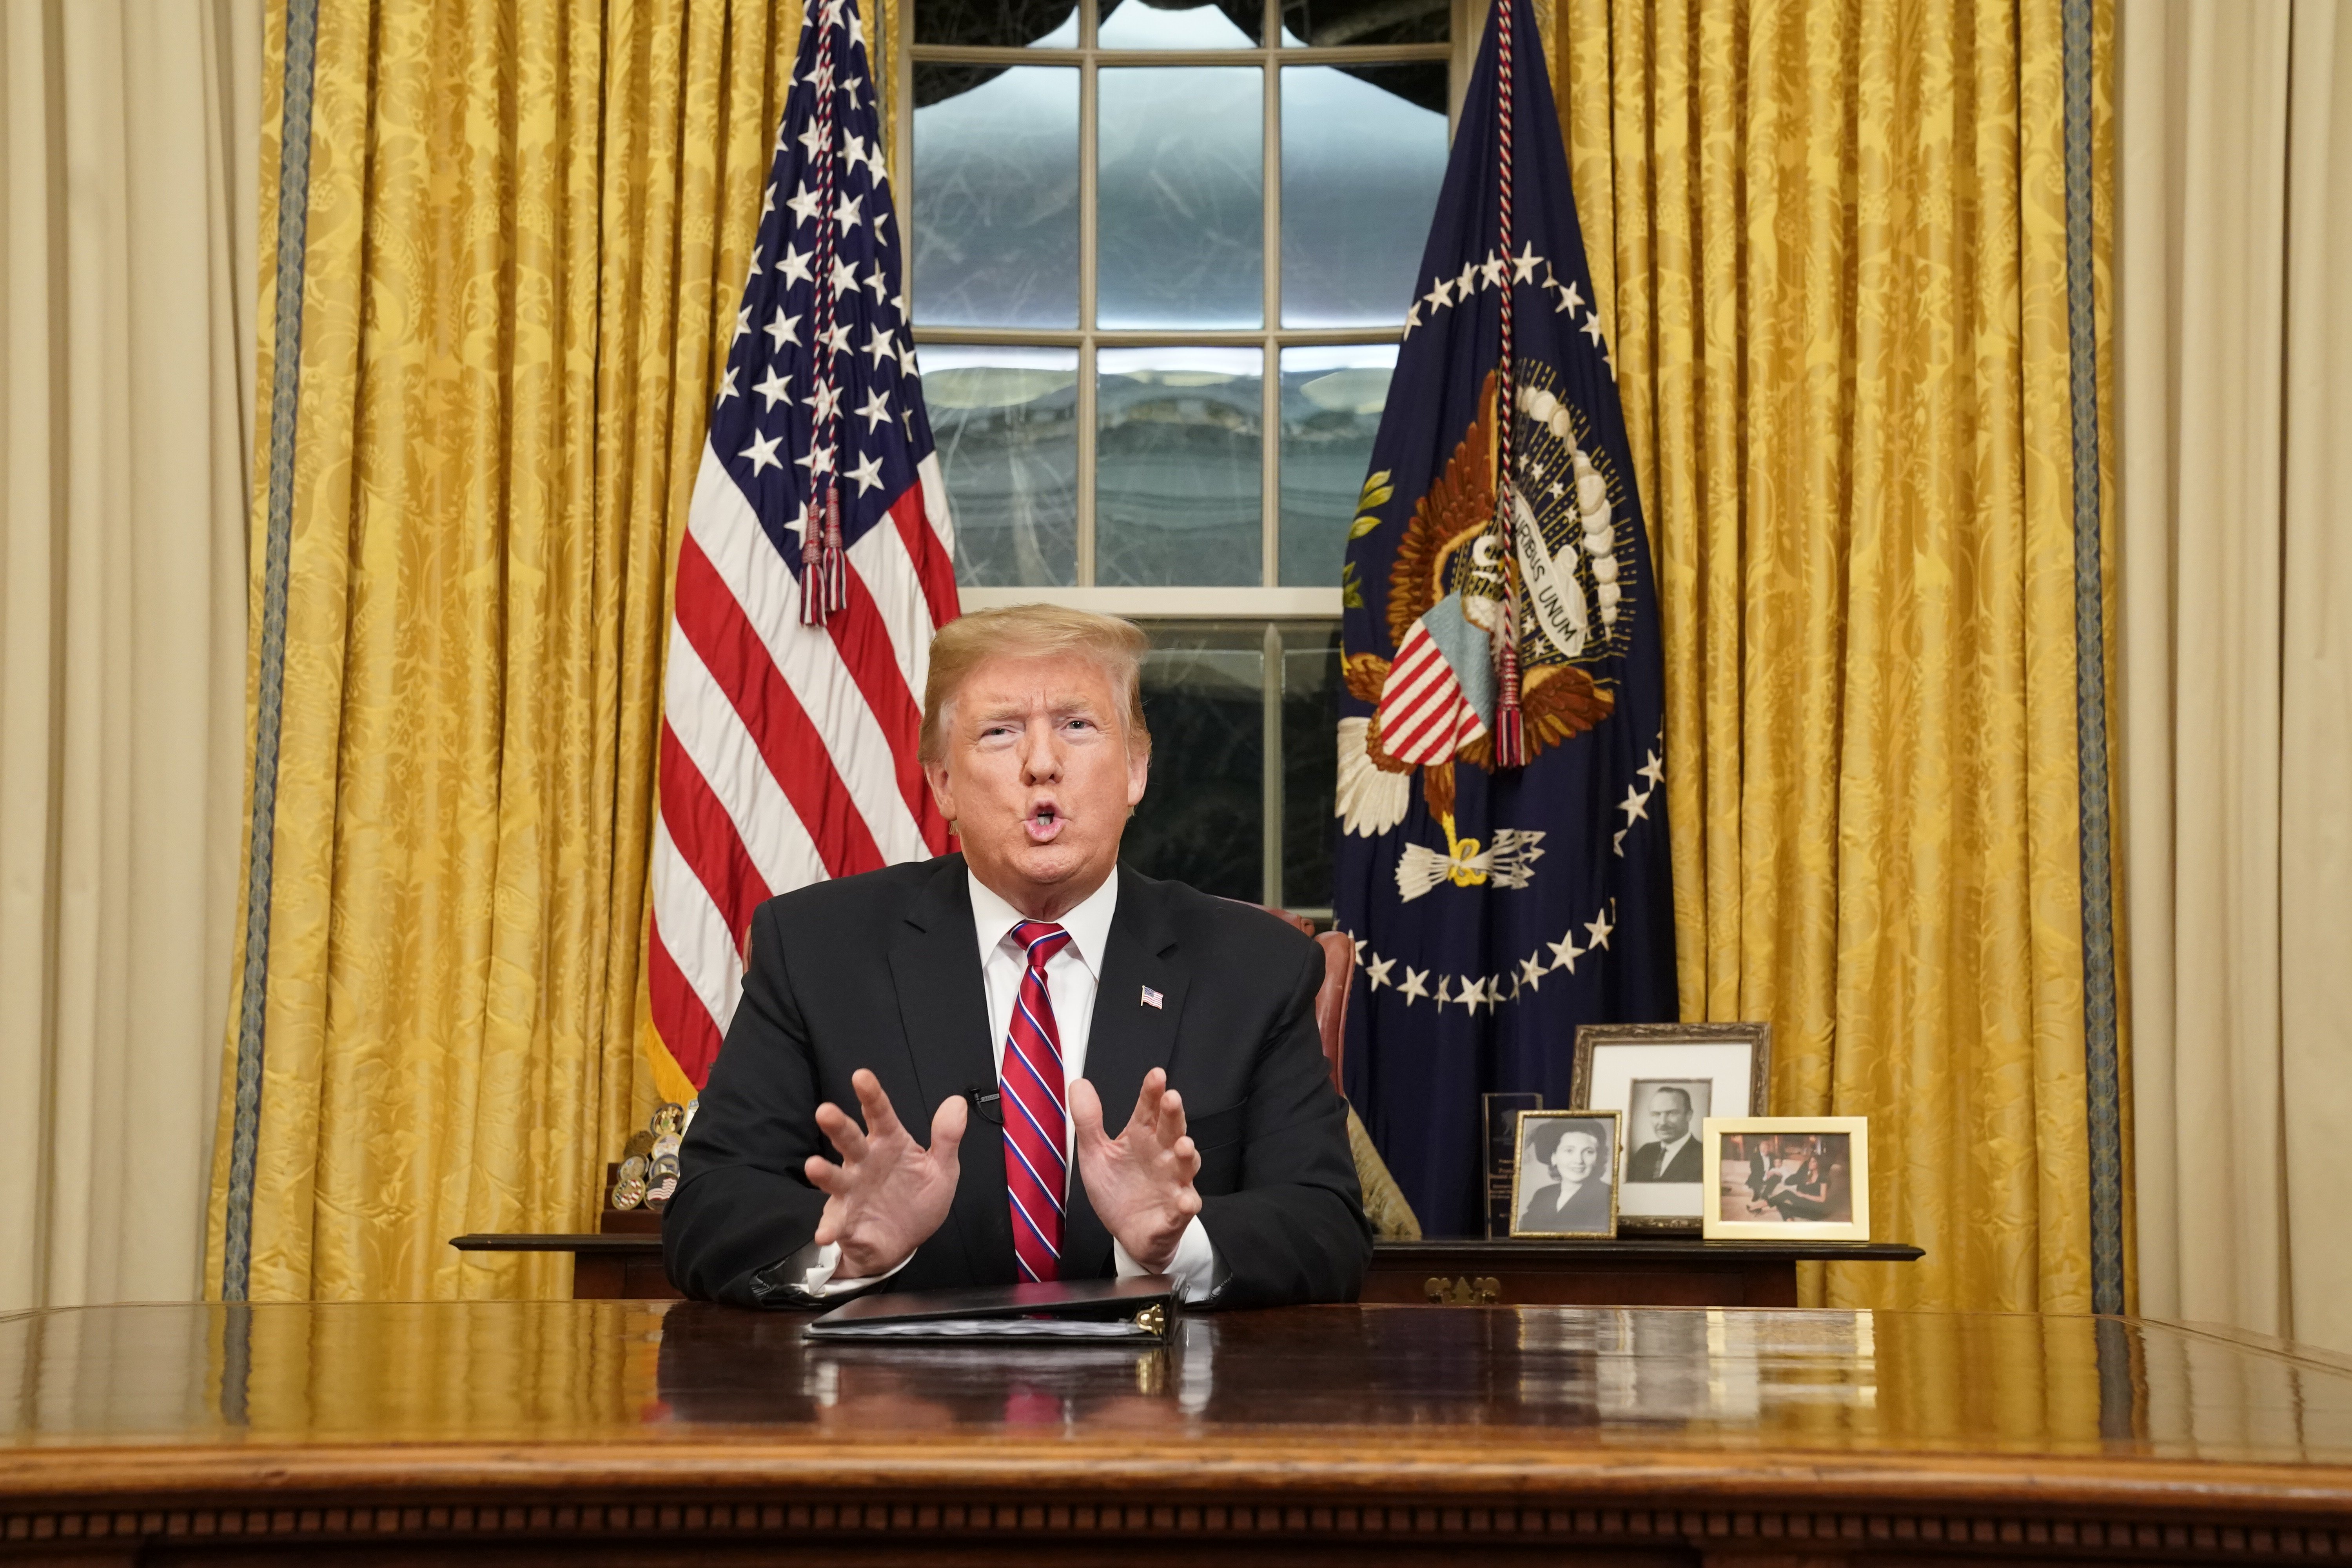 Donald Trump speaking to the nation in his first-prime address from the Oval Office of the White House | Photo: Getty Images